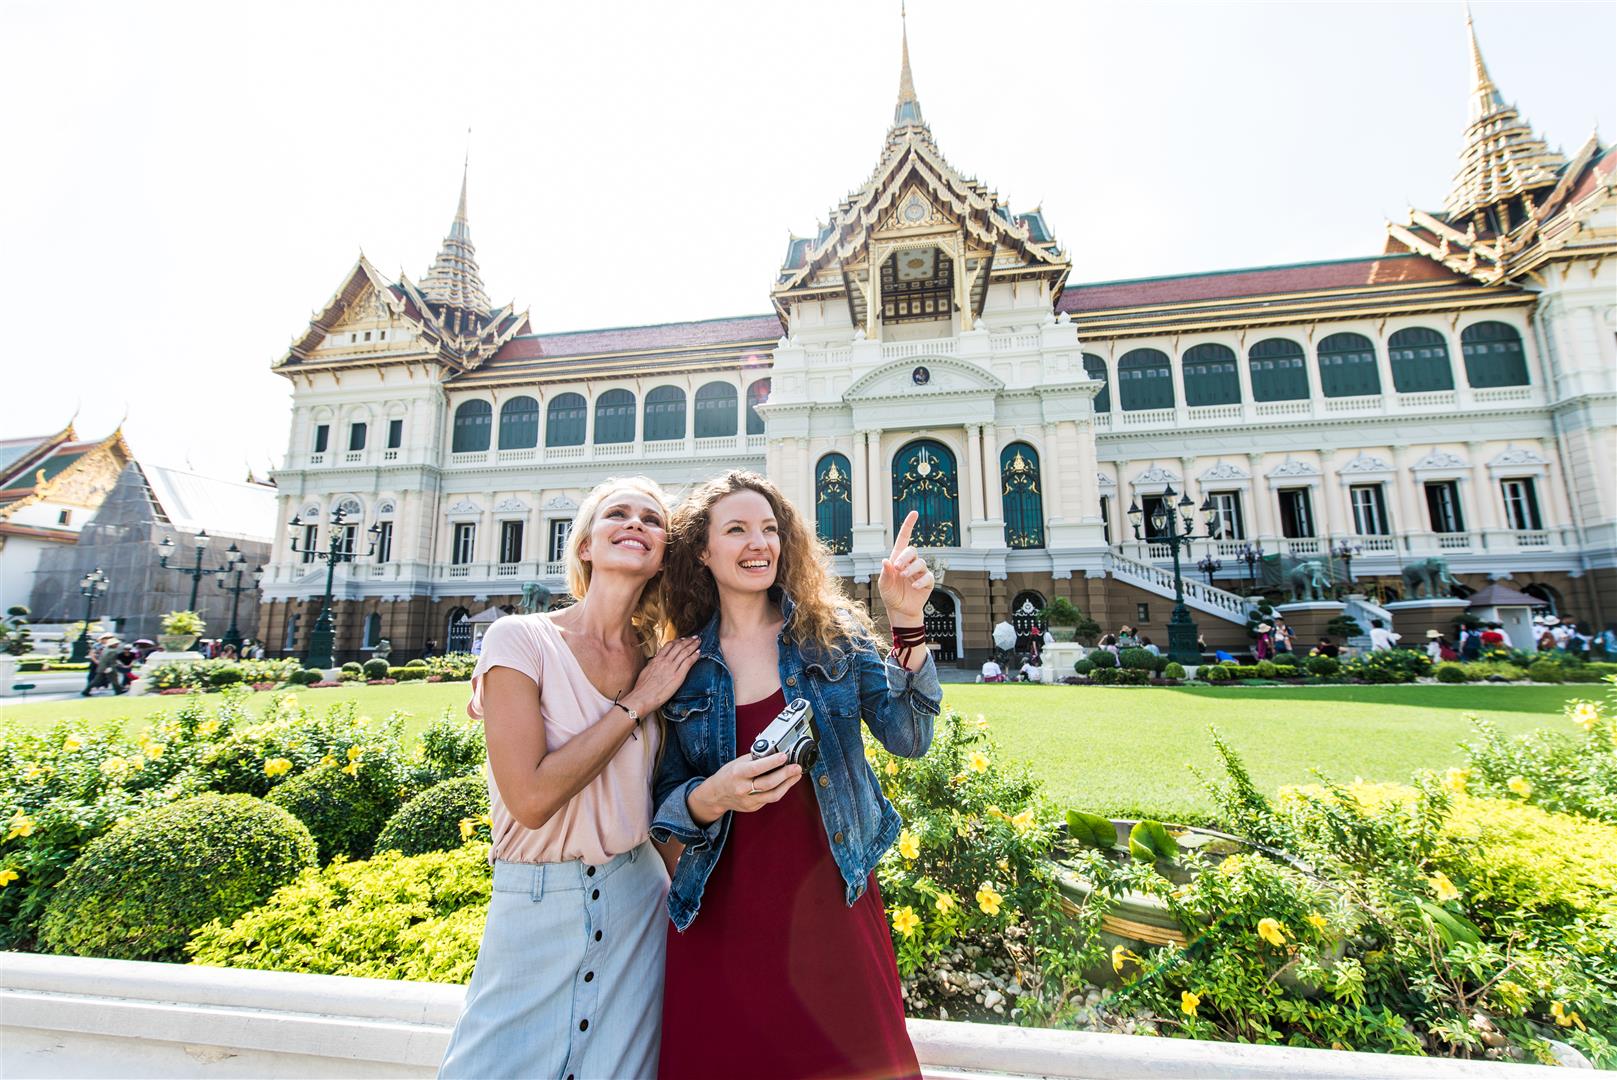 Thailand Wins the Hearts of Tourists From "North America-Europe" As Their Popular Destination